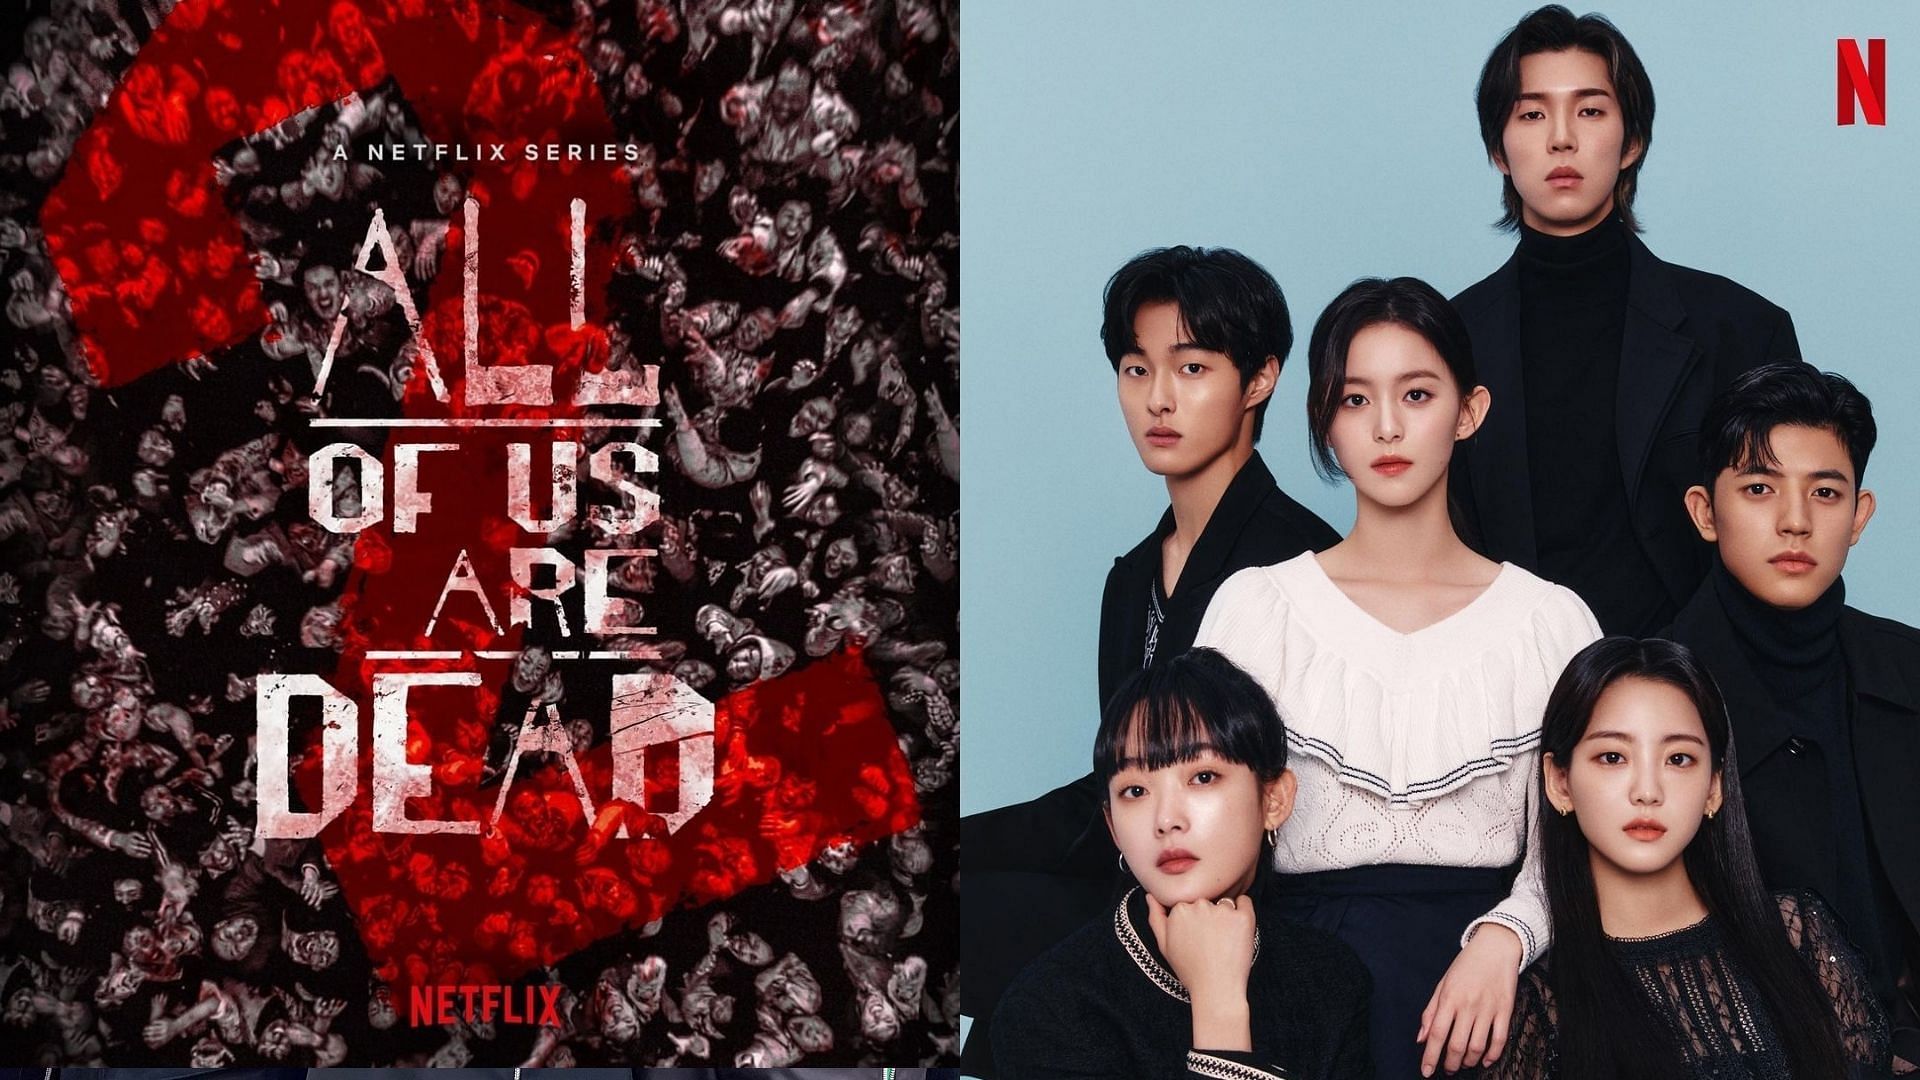 Watch: All of Us are Dead cast confirms return with season 2 on Netflix